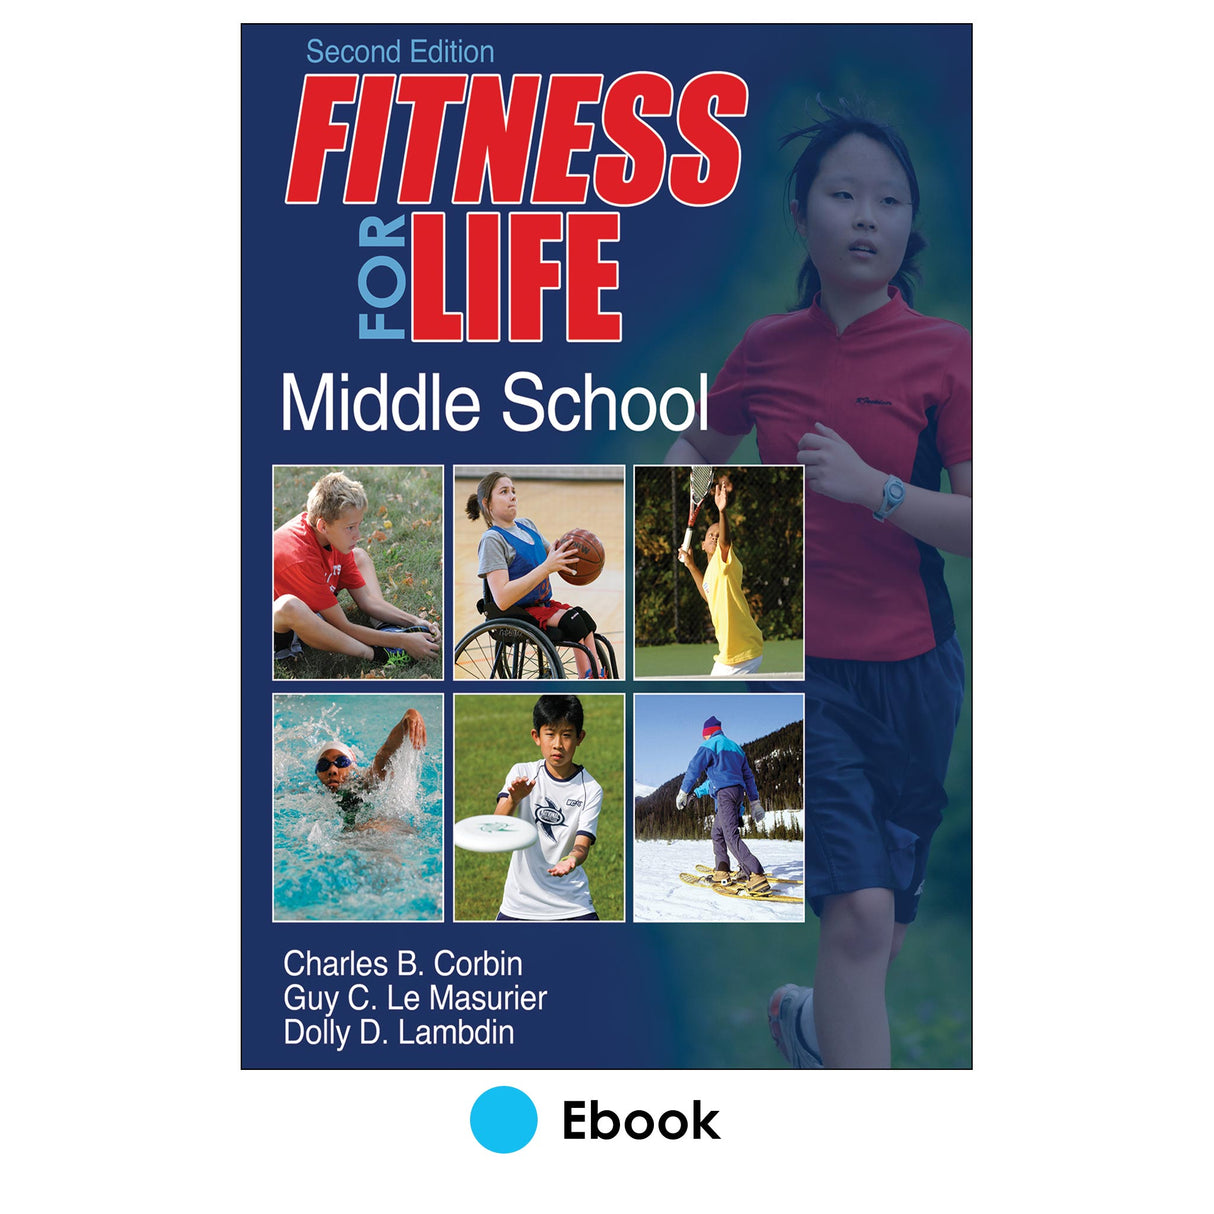 Fitness for Life: Middle School 2nd Edition PDF